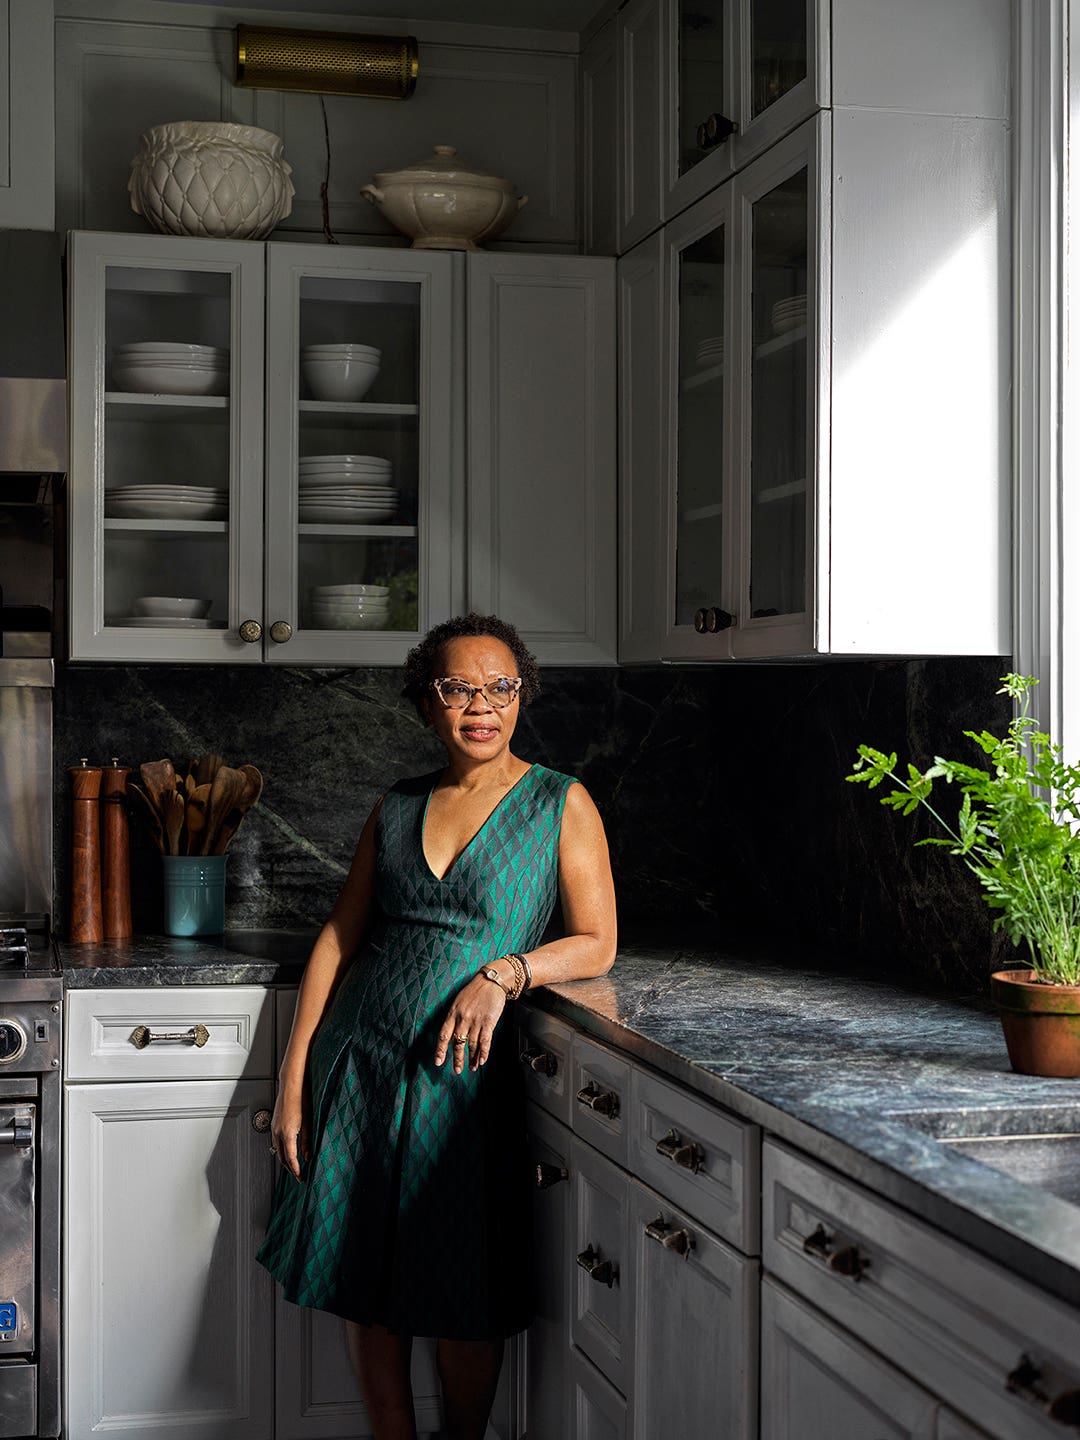 This Designer Saved Big With Secondhand Kitchen Cabinets—And Put the Scraps to Use